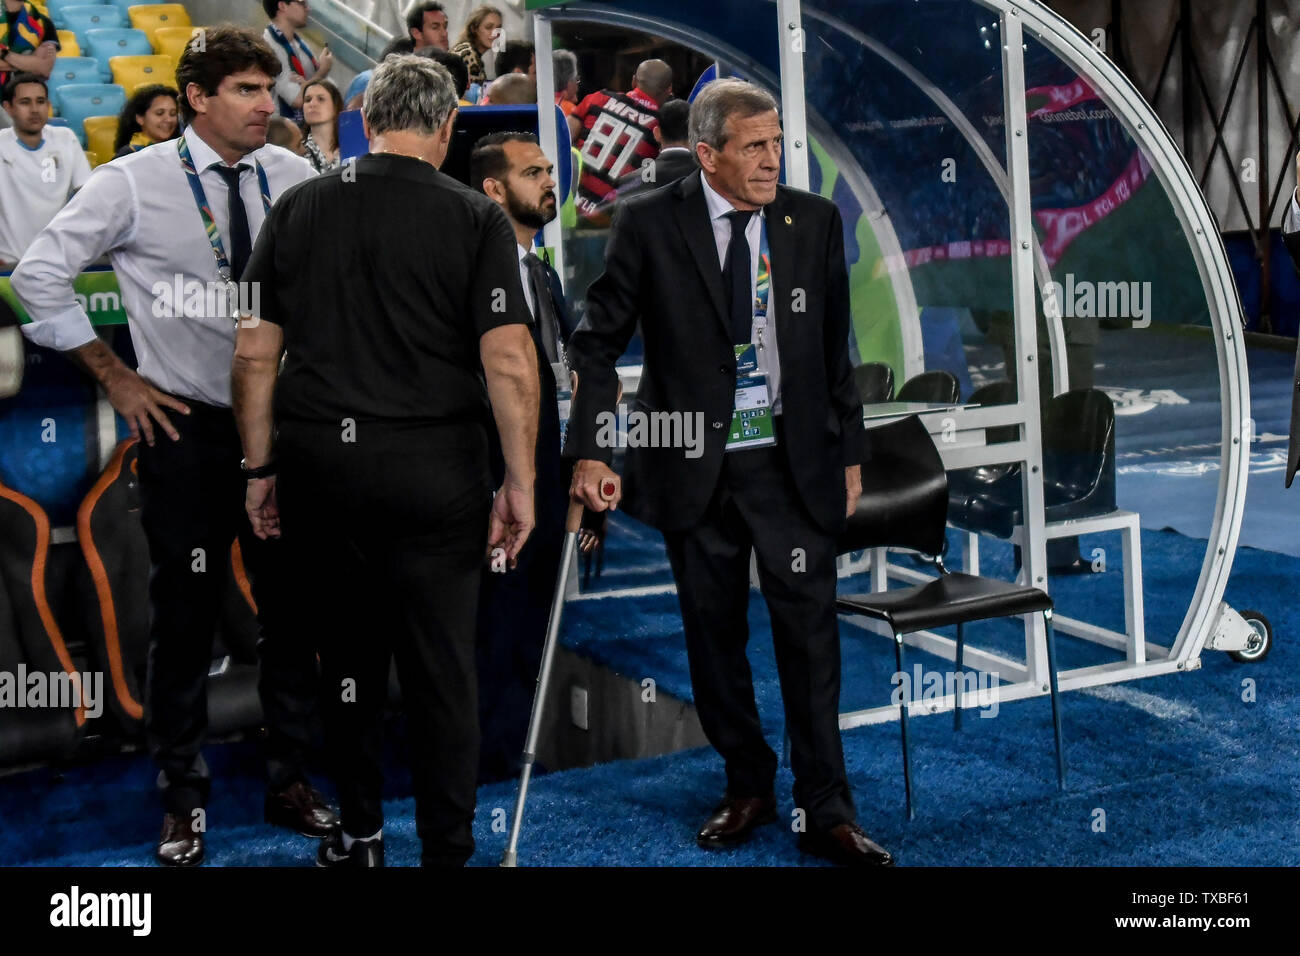 Rio De Janeiro, Brazil. 24th June, 2019. Coach Oscar Tabarez during a match between Chile and Uruguay, valid for the group stage of the Copa America 2019, held this Monday (24) at the Maracanã Stadium in Rio de Janeiro, RJ. Credit: Nayra Halm/FotoArena/Alamy Live News Stock Photo